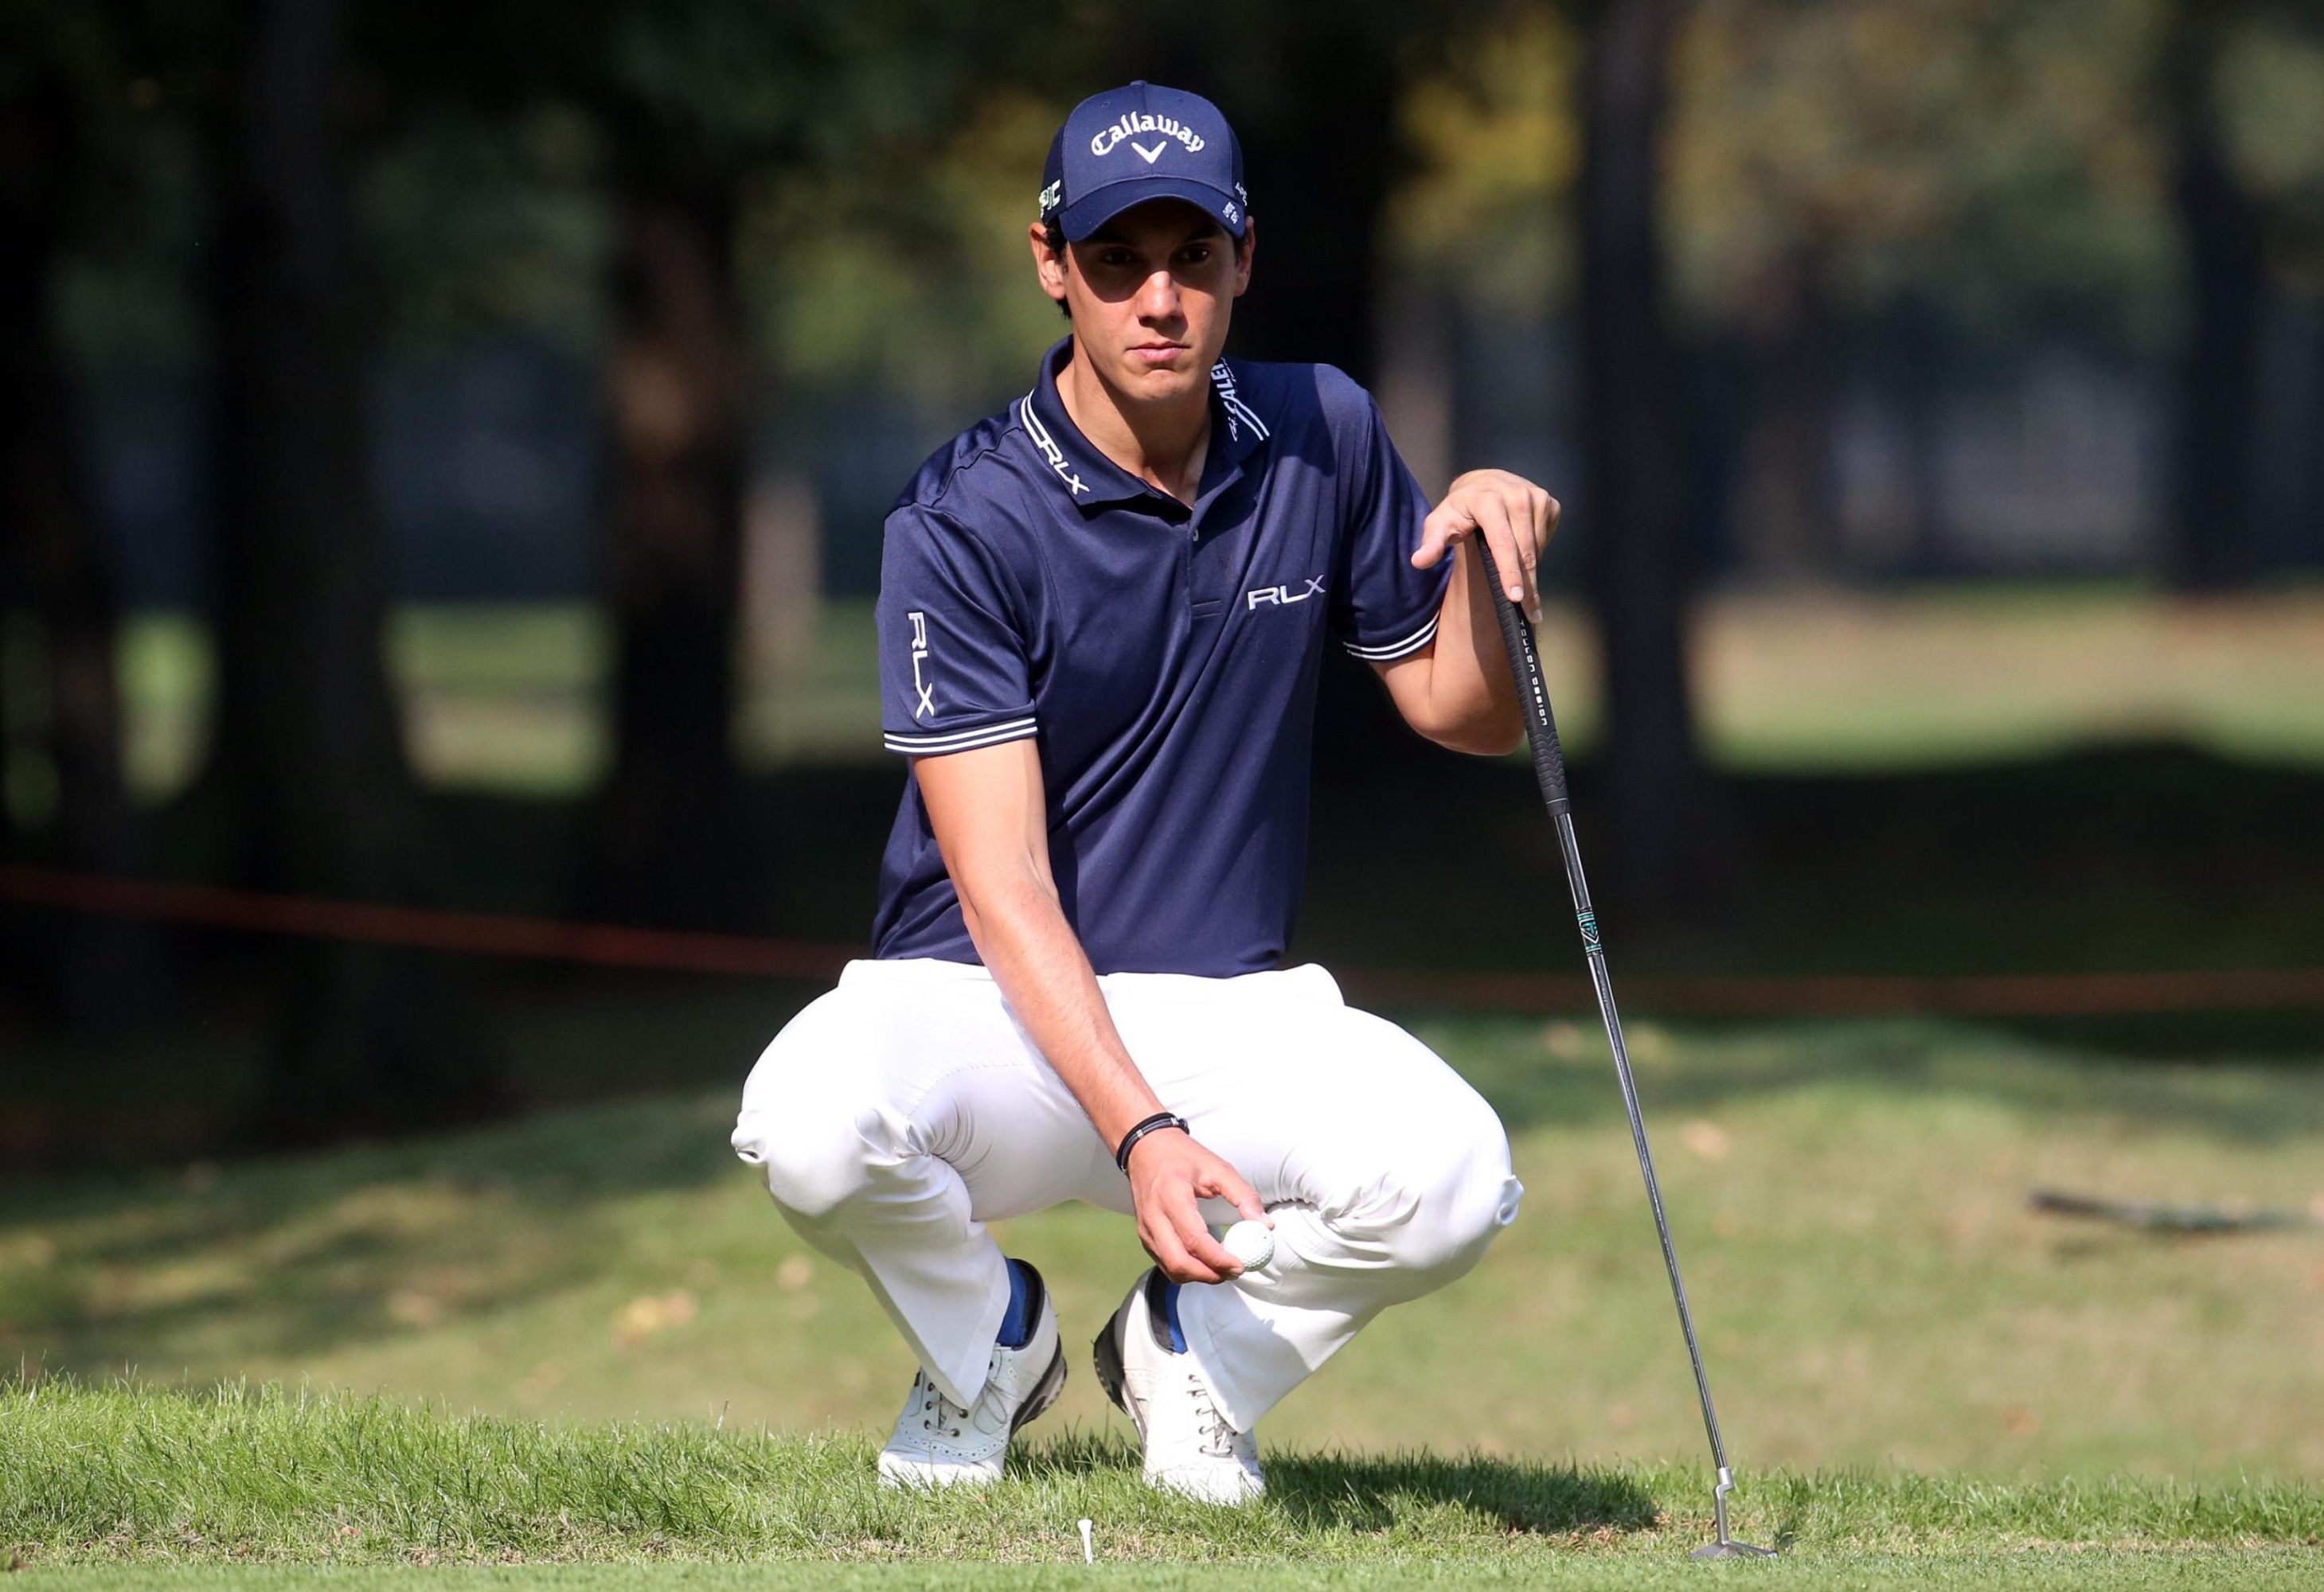 Matteo Manassero, of Italy, plays a shot during the second day of the 74Â° Open Golf of Italy in Monza, Italy, 13 October 2017. The Italia Open Golf of Italy runs from 12 to 15 October 2017 ANSA / MATTEO BAZZI